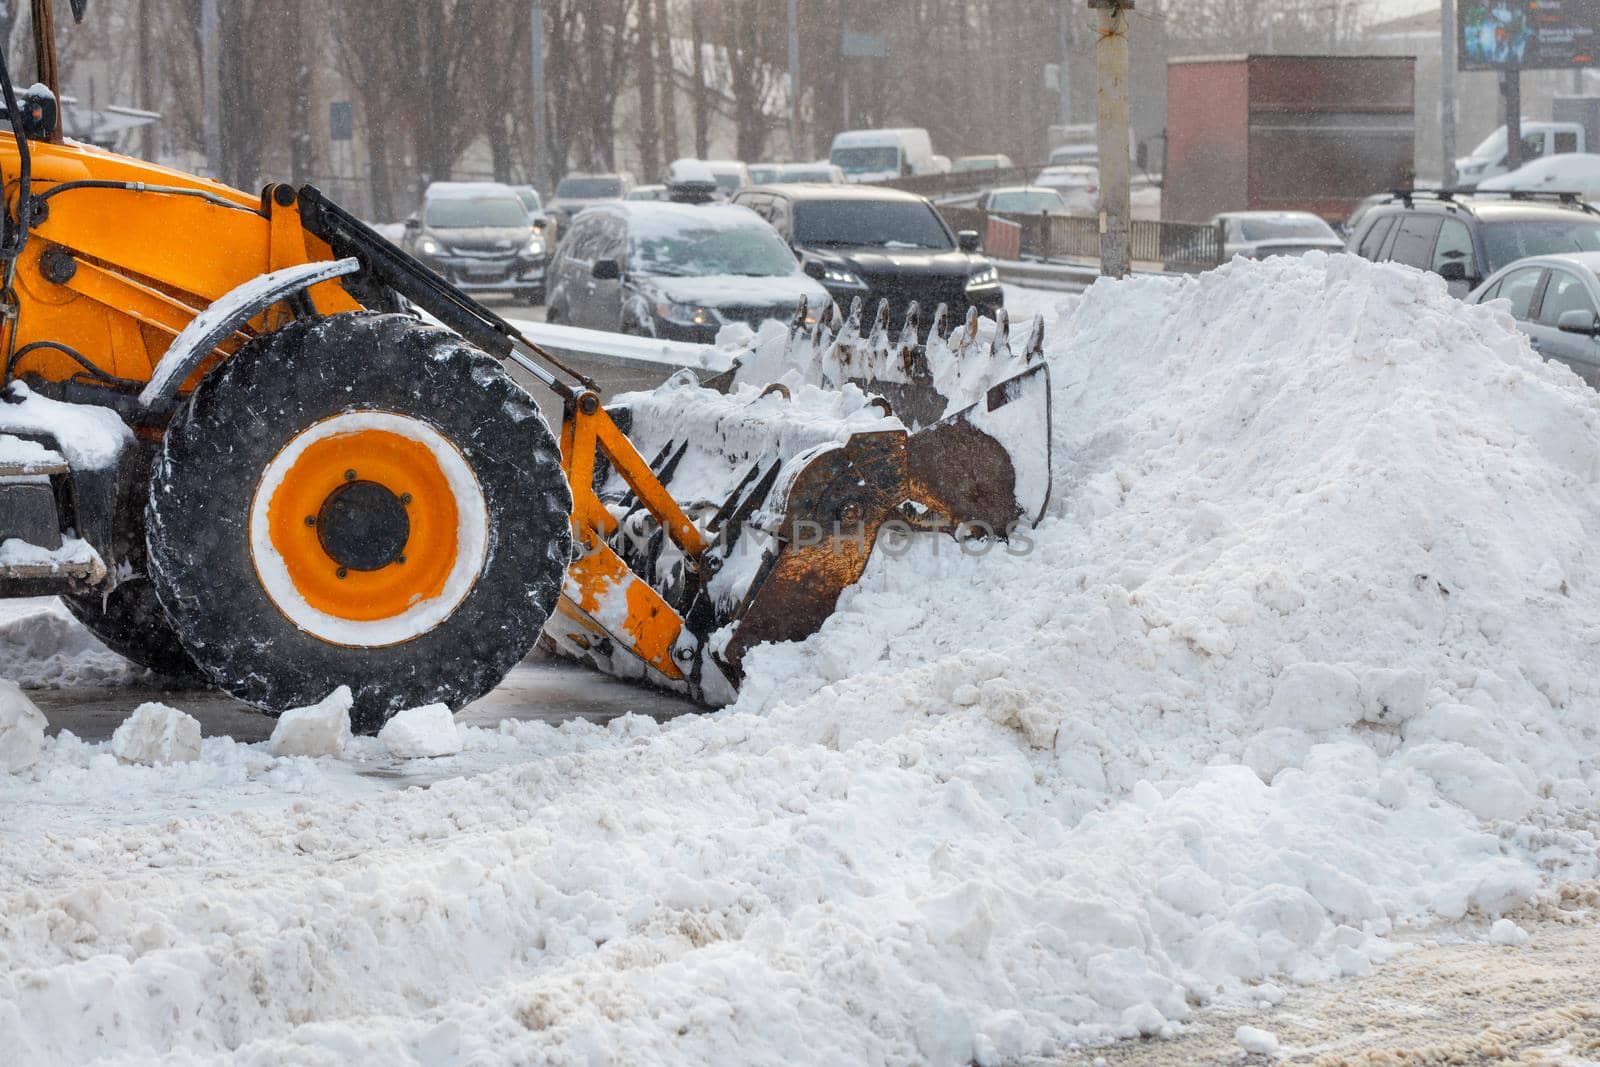 A tractor using a large metal bucket cleans the carriageway of a city street from an abundance of snow during a snowfall.